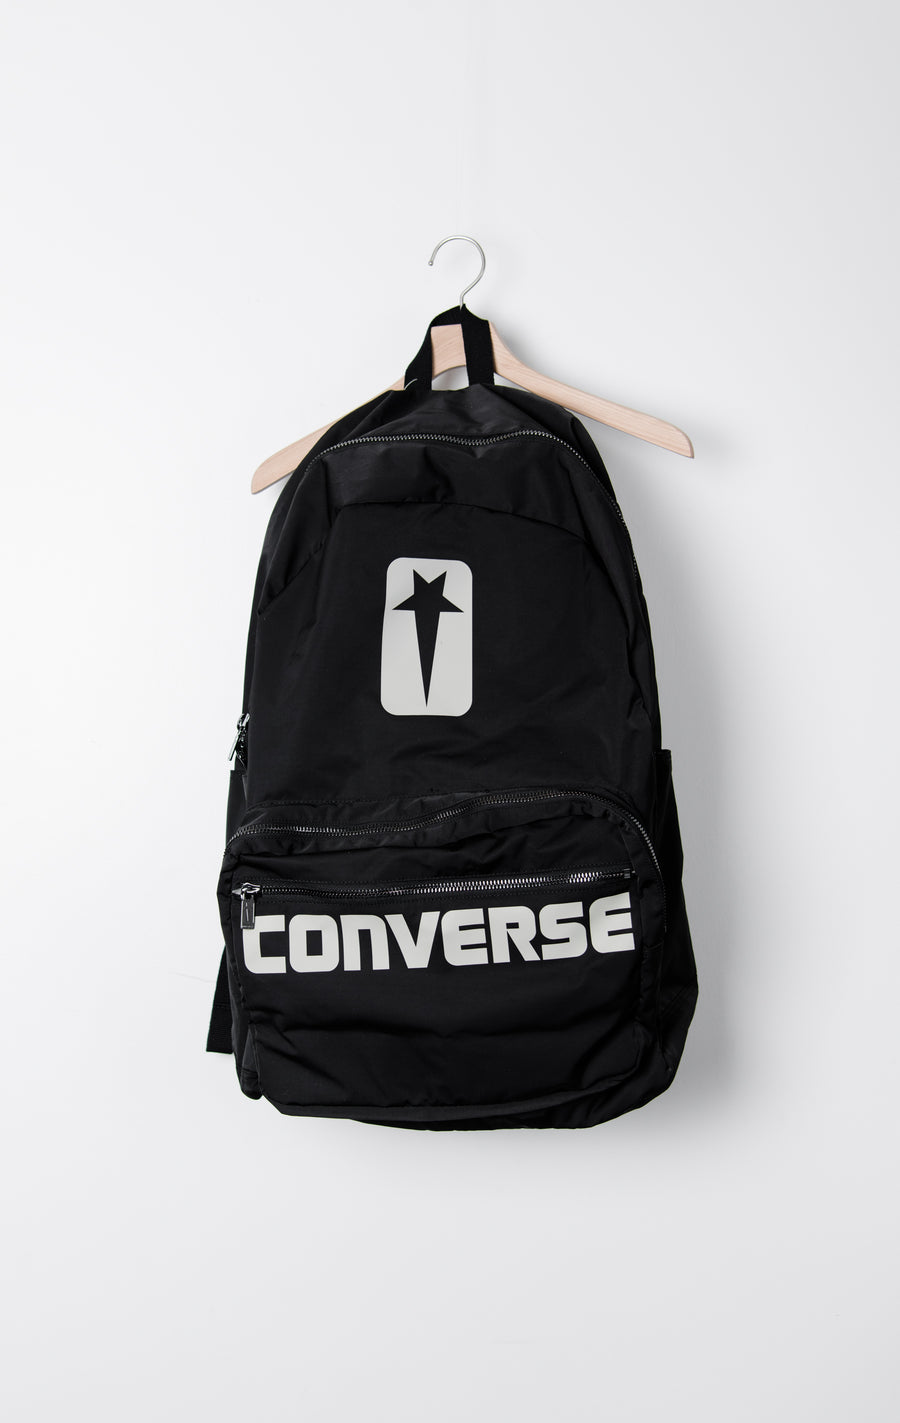 Oversized Backpack Black DC02AX839 (LAUNCH PRODUCT)